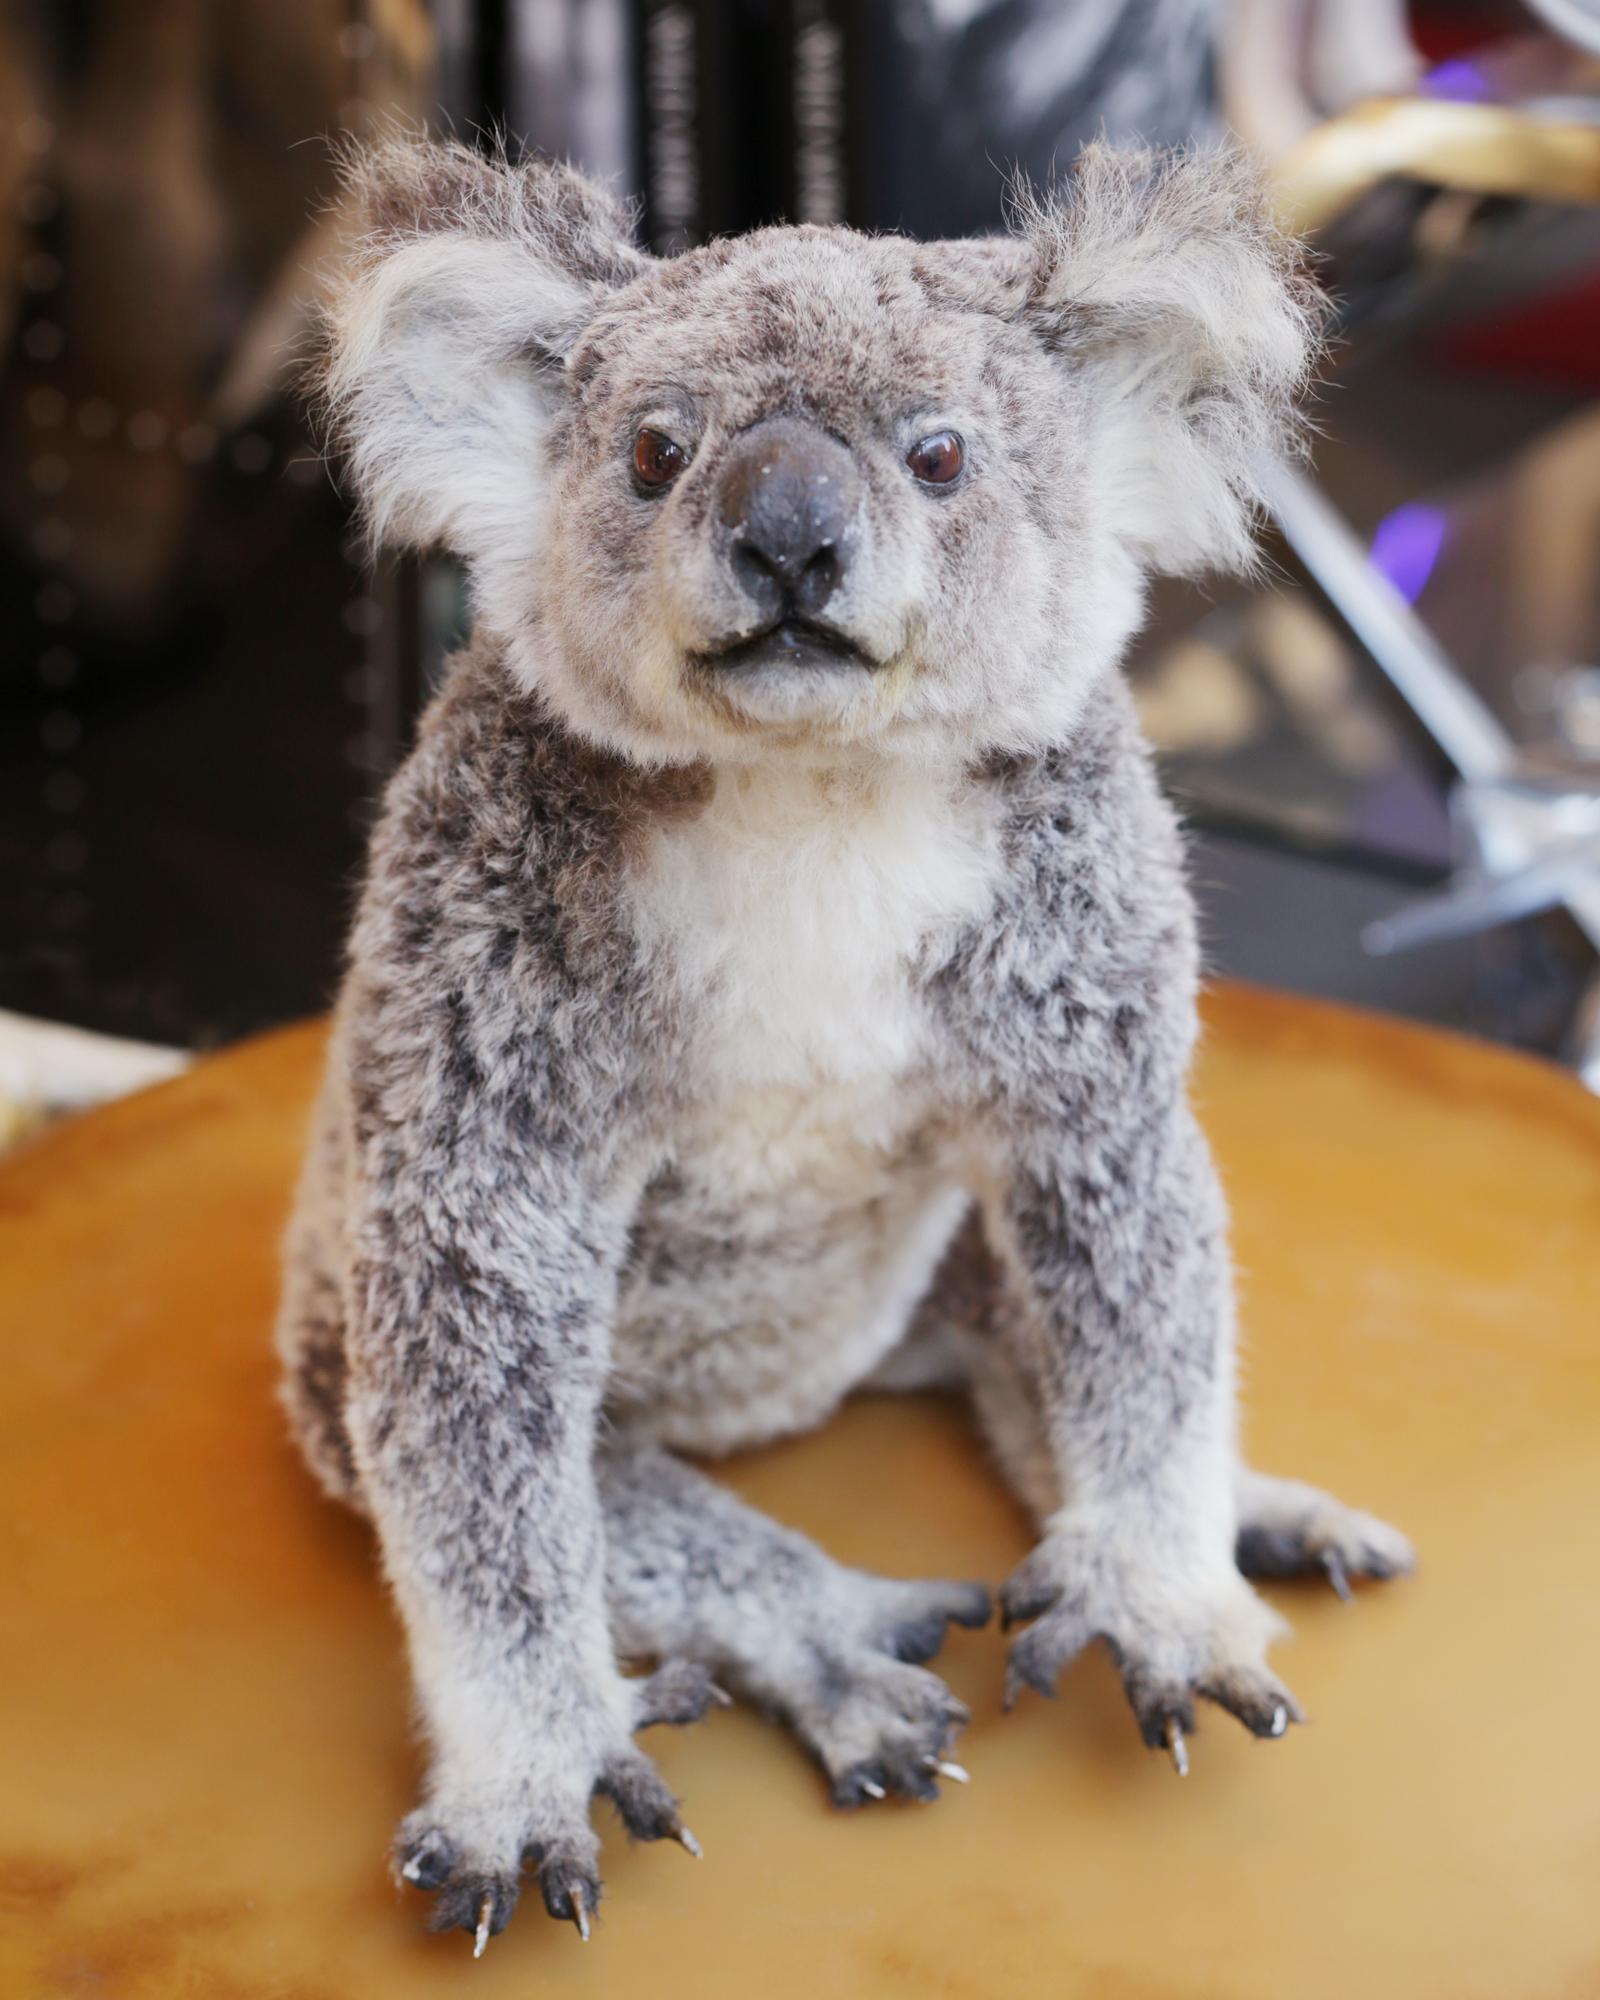 Taxidermy Koala, natural death, Koala
from Australia in perfect condition. Unique
and exceptional piece.